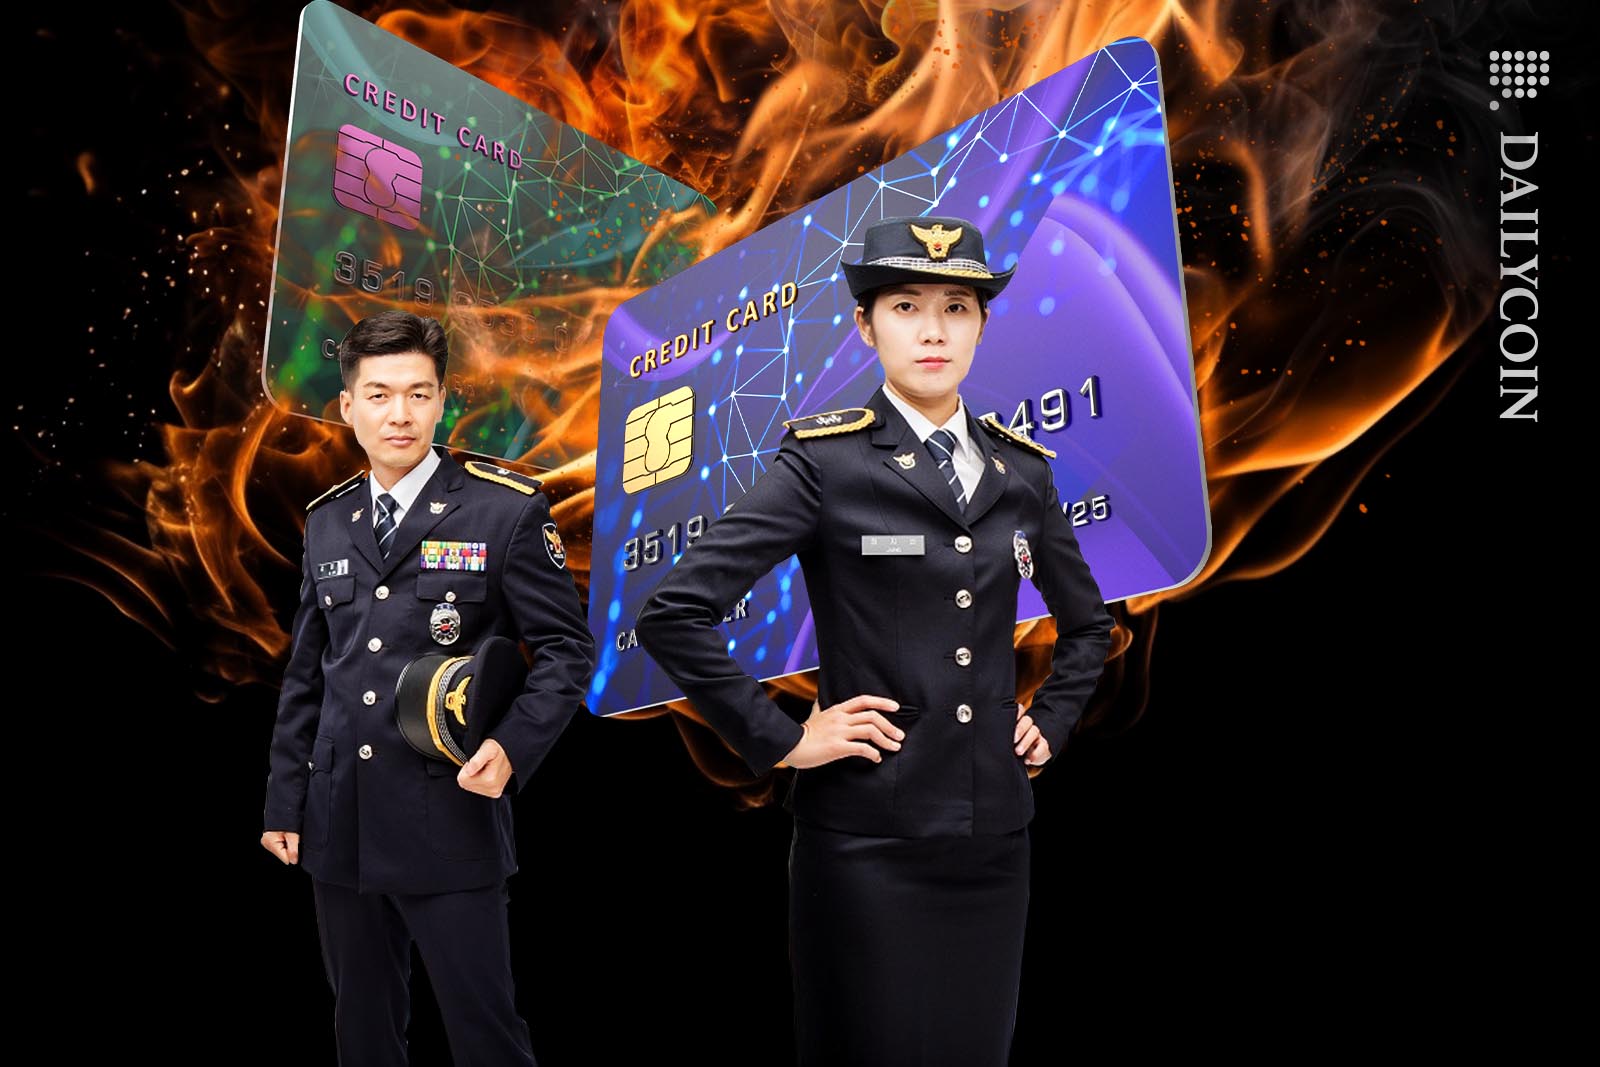 South Korean police officers posing infront of burning credit cards.